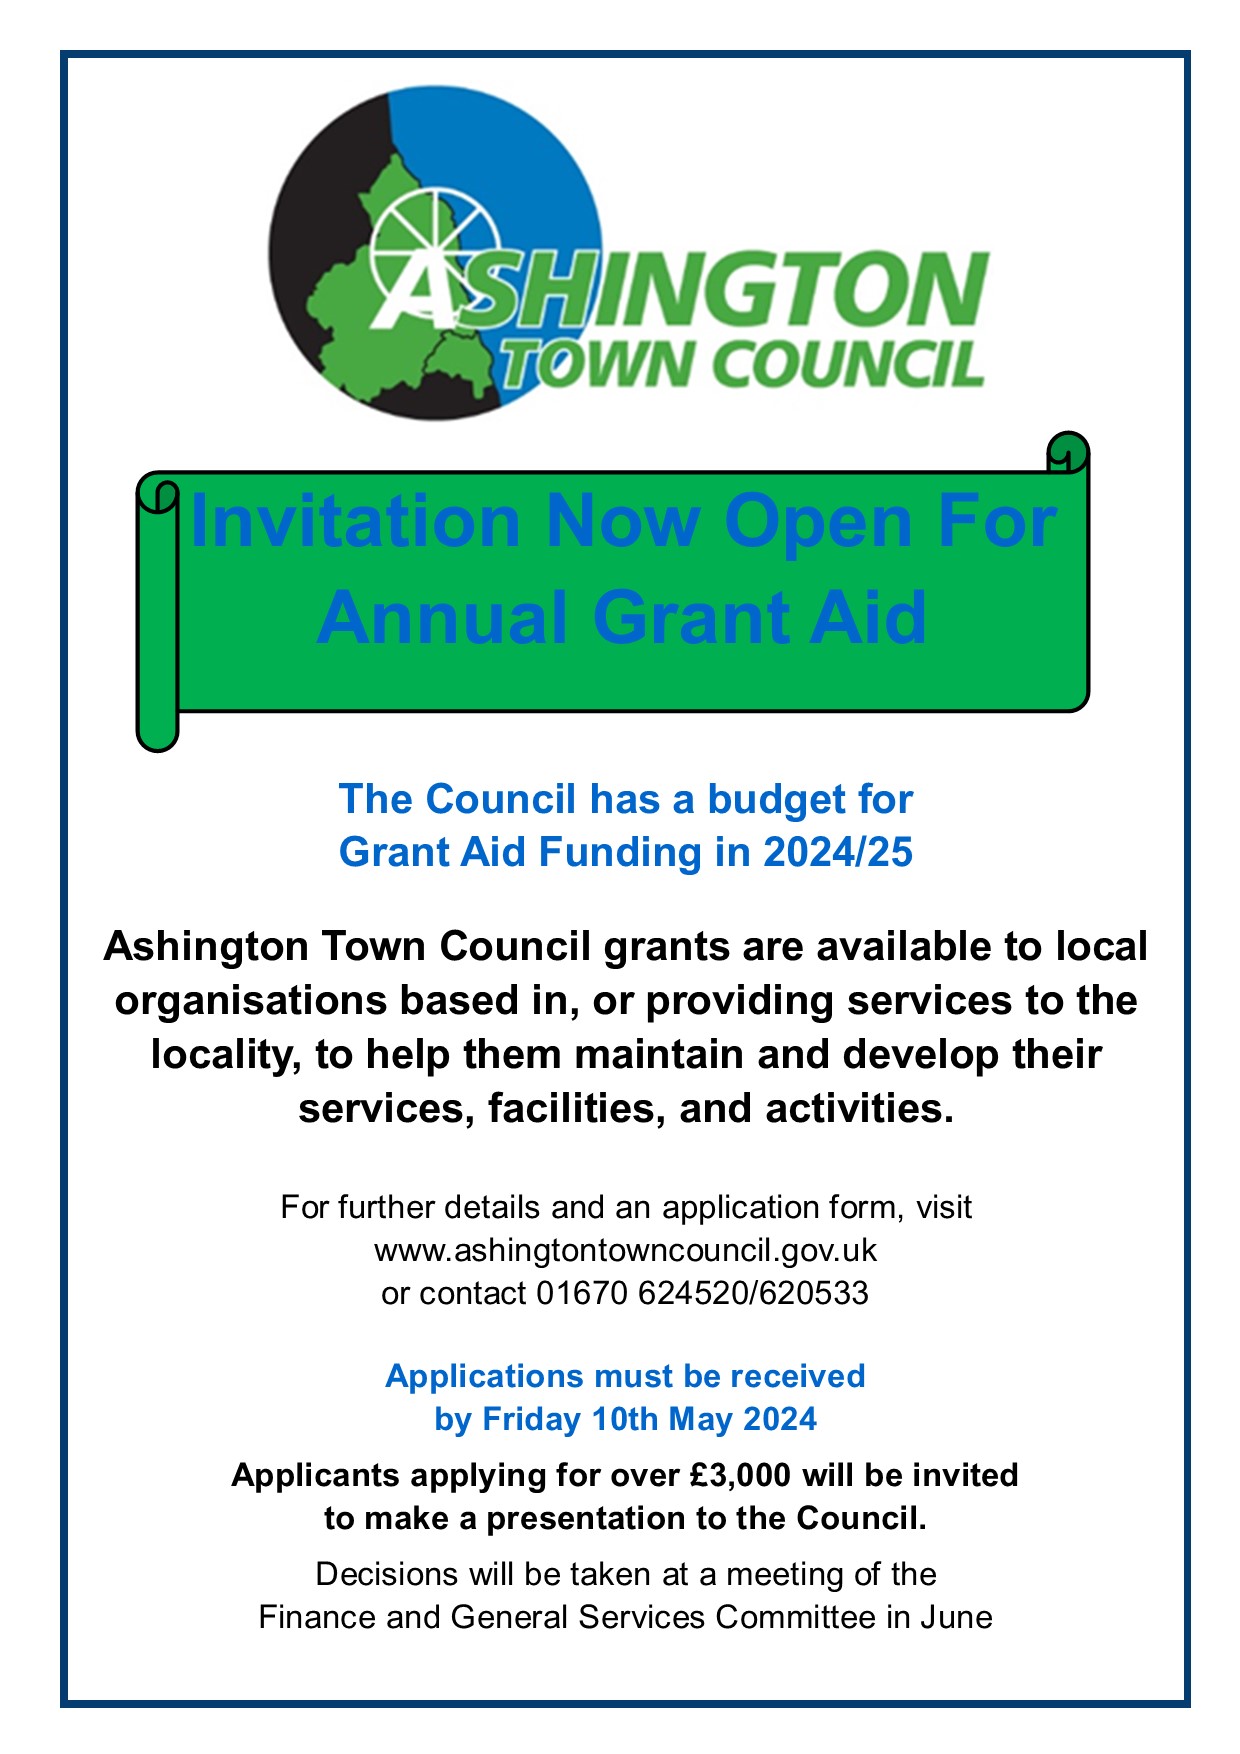 Ashington Town Council Annual Grant Aid Now Open For Applications